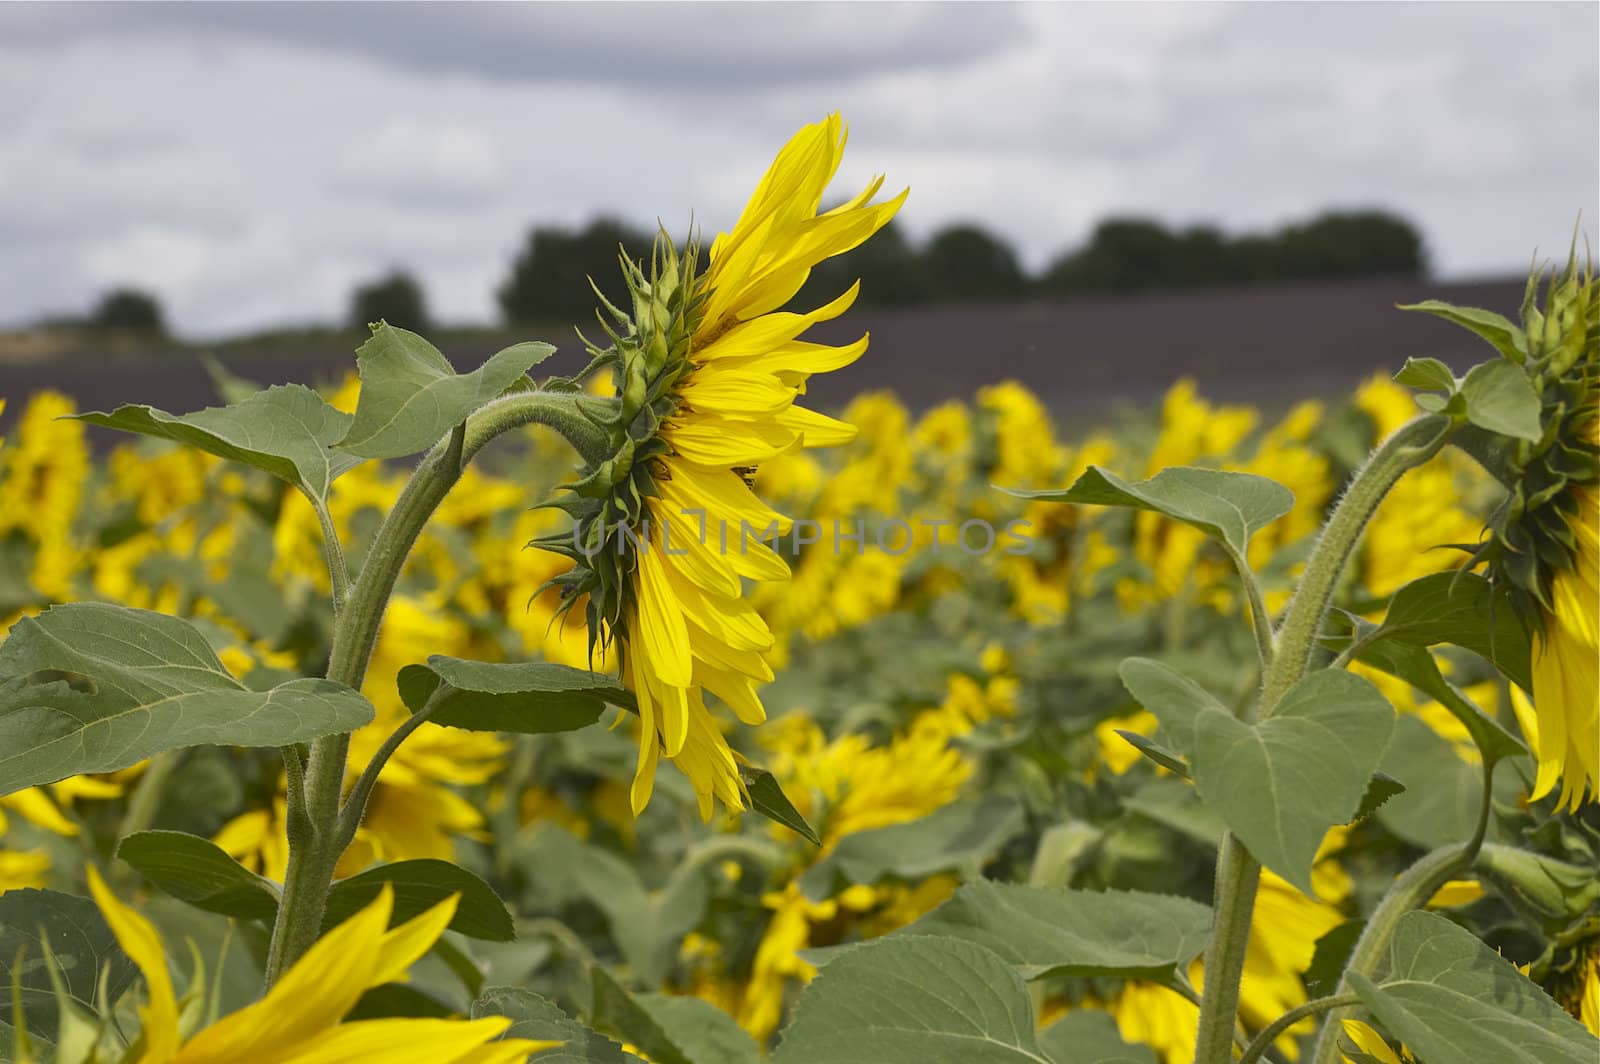 Many sunflowers, with a close up of a central flower in profile, against a green background and white sky, with copy space.